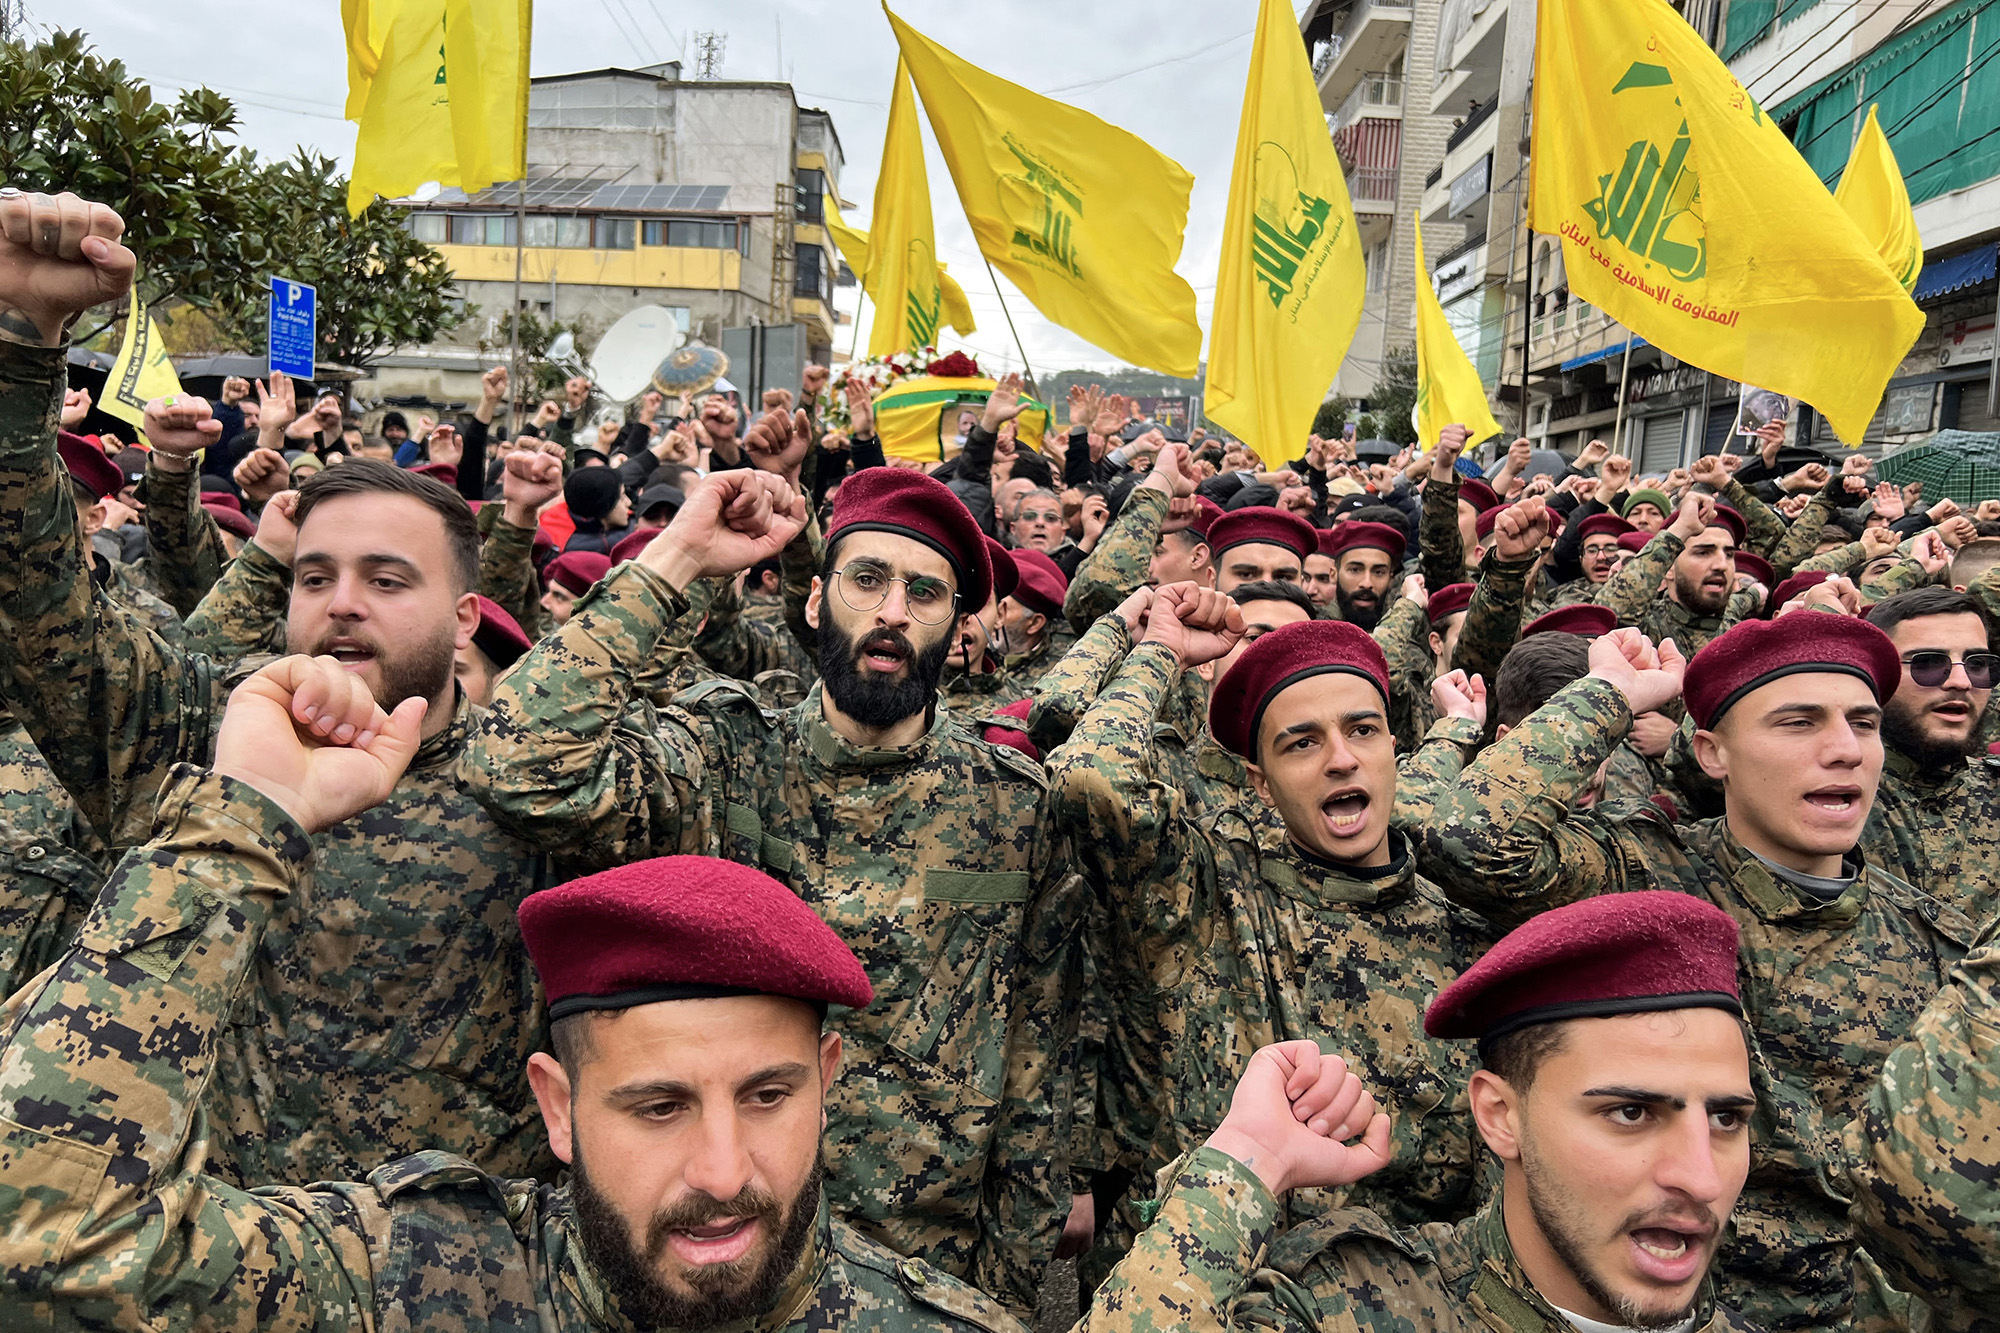 Hezbollah members and supporters attend a funeral in Lebanon's southern city of Nabatieyh on February 16.